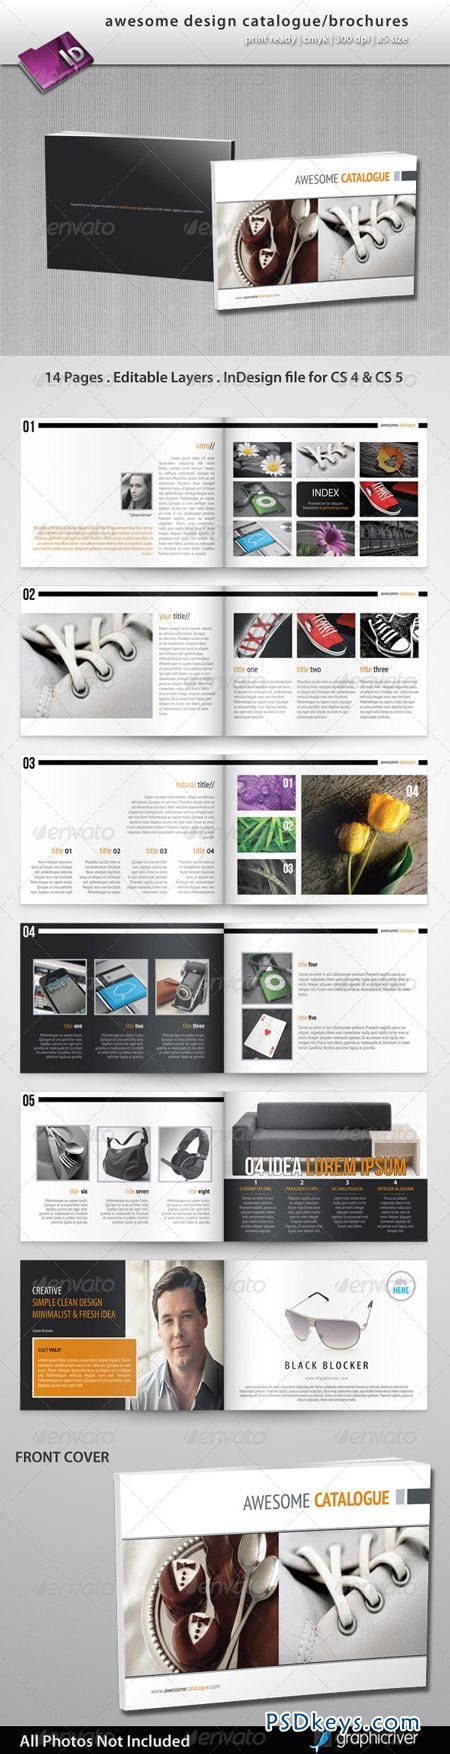 Awesome Design Catalogue Brochures 2479043